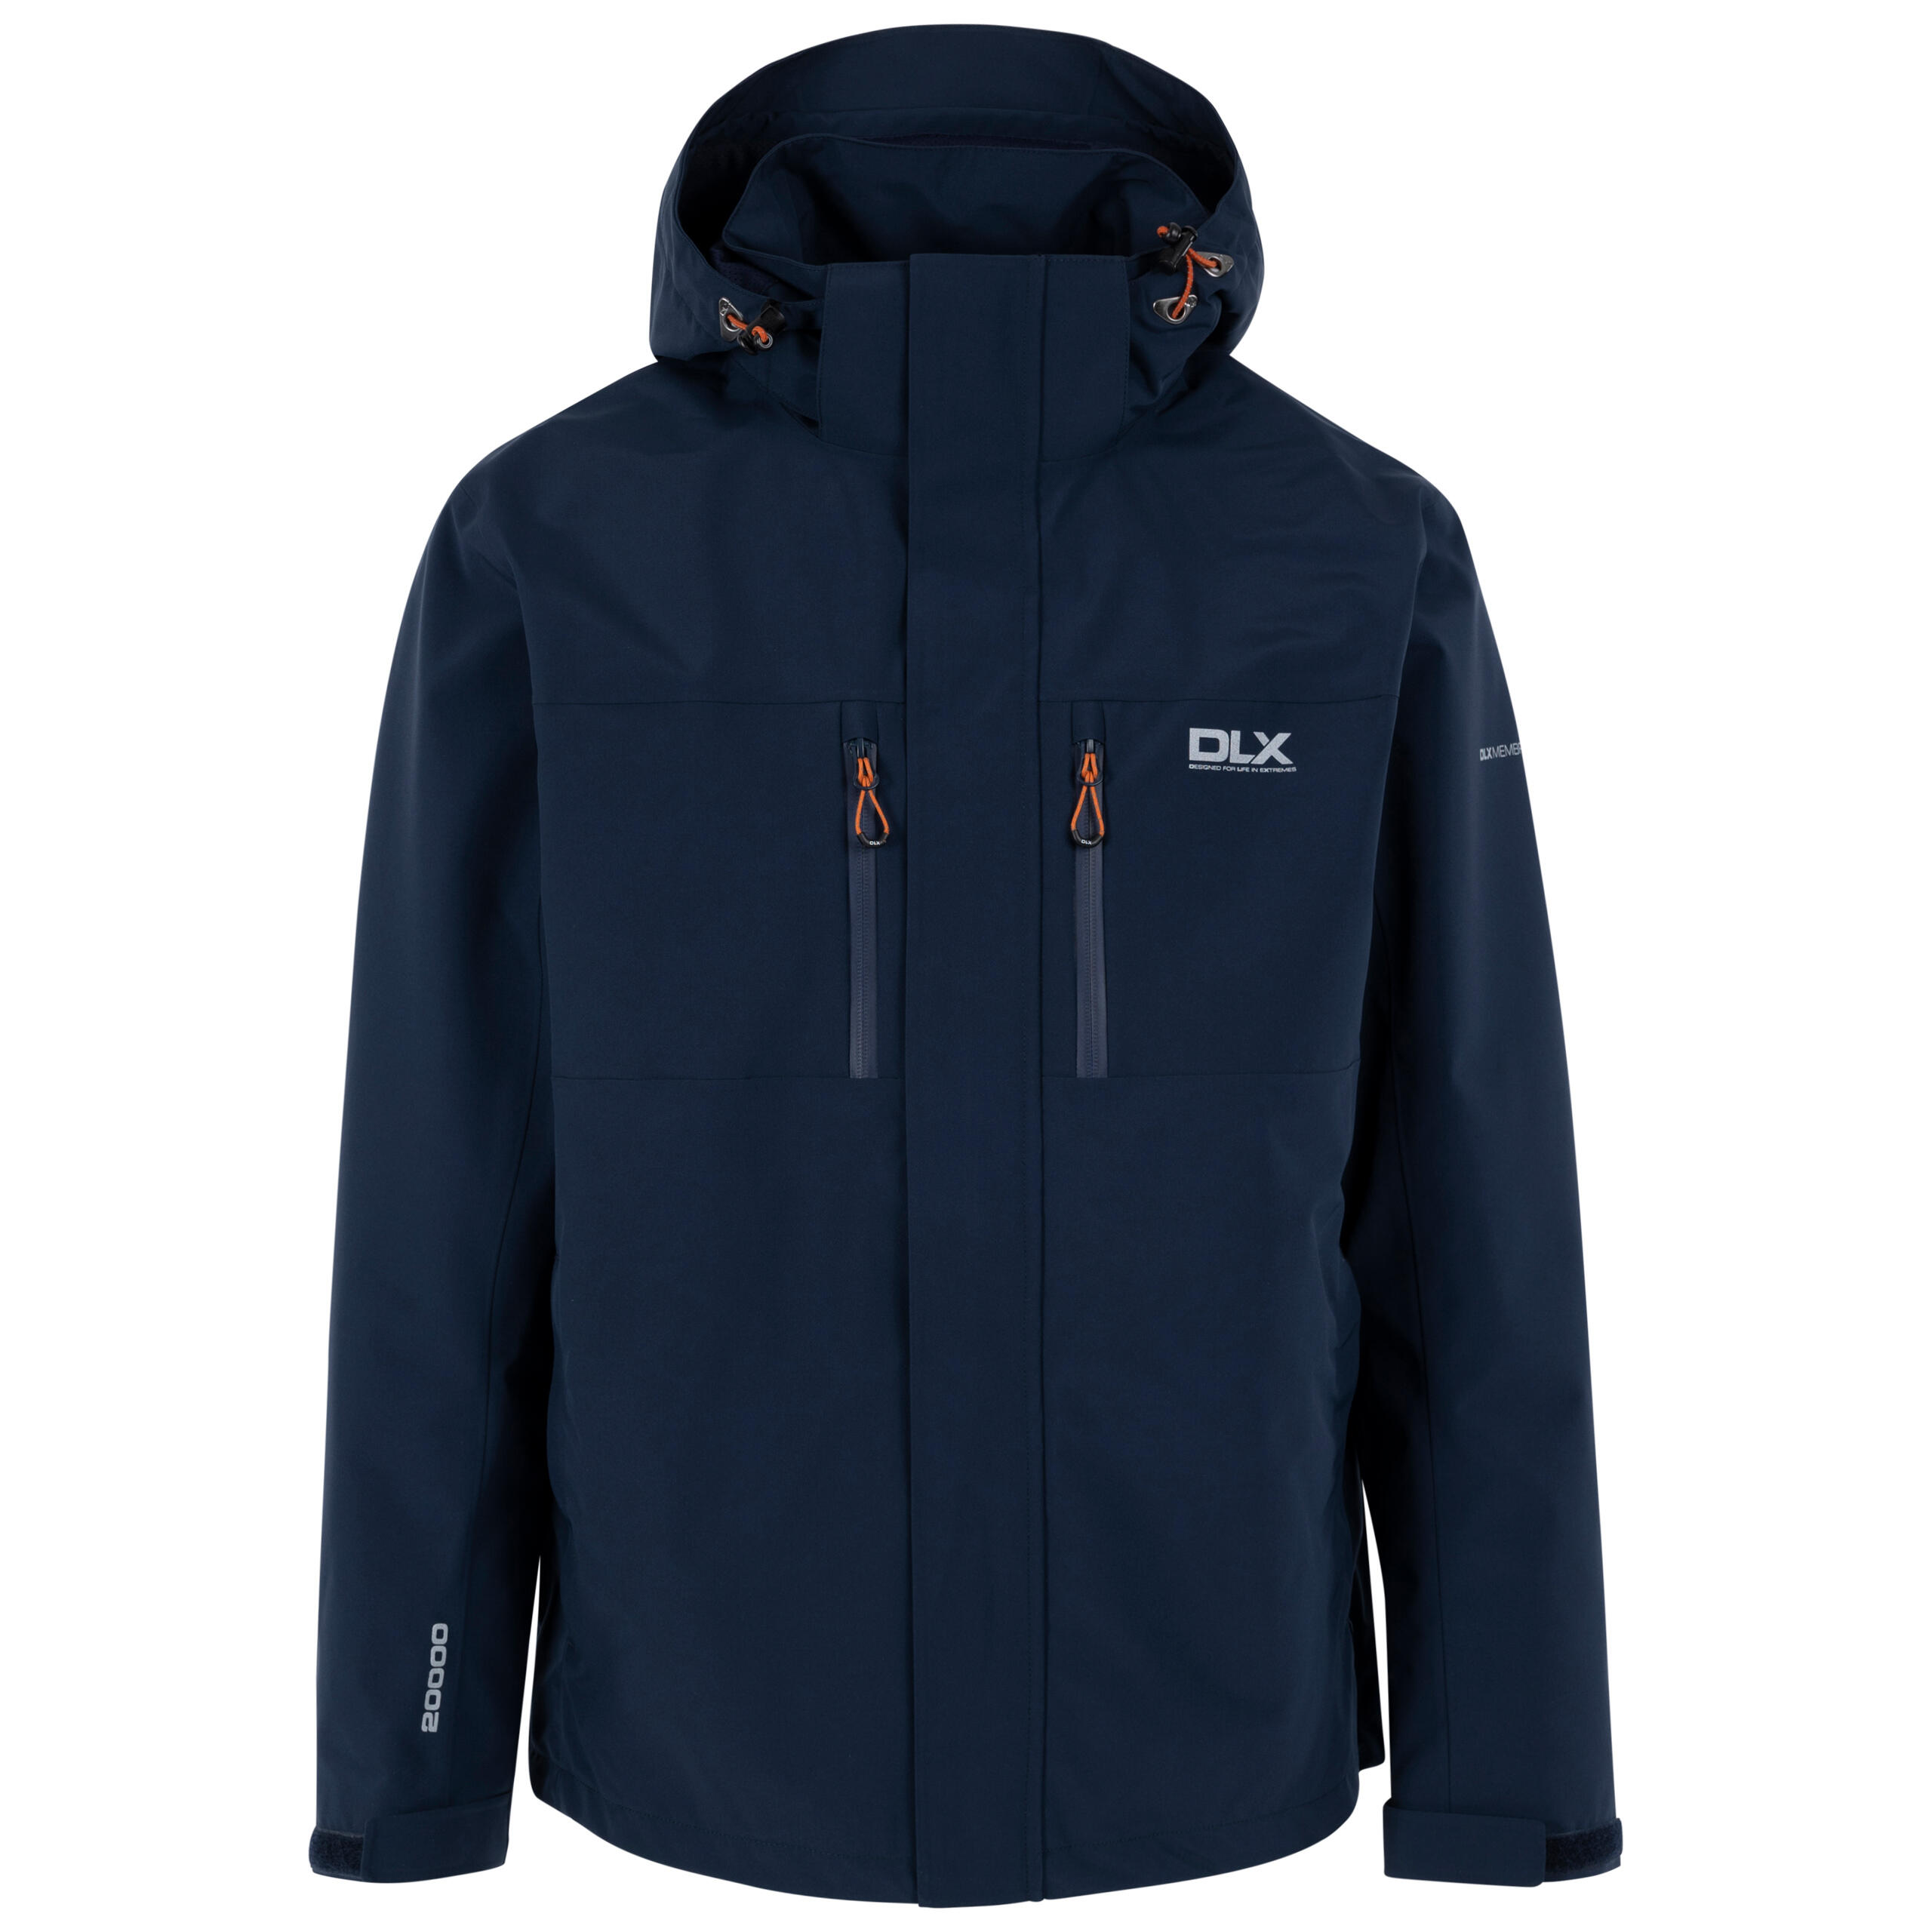 DLX Mens Waterproof Jacket with Zip Off Hood, Pockets and Taped Seams Oswalt